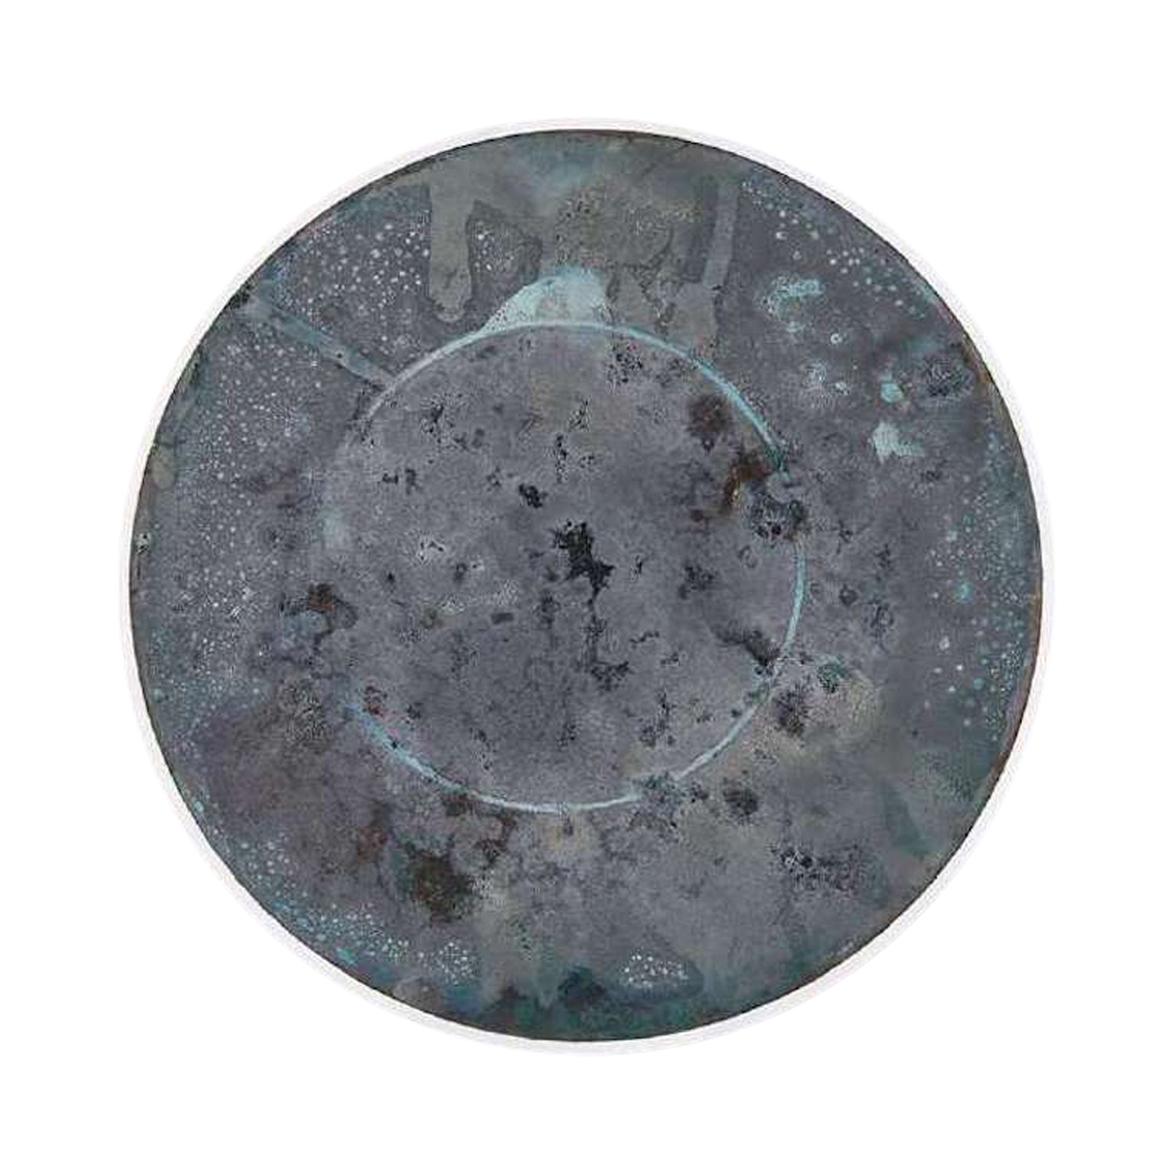 Copper & Stainless Steel Decor/ Plate, 'Star Dust 3.0 #4' by Daishi Luo For Sale